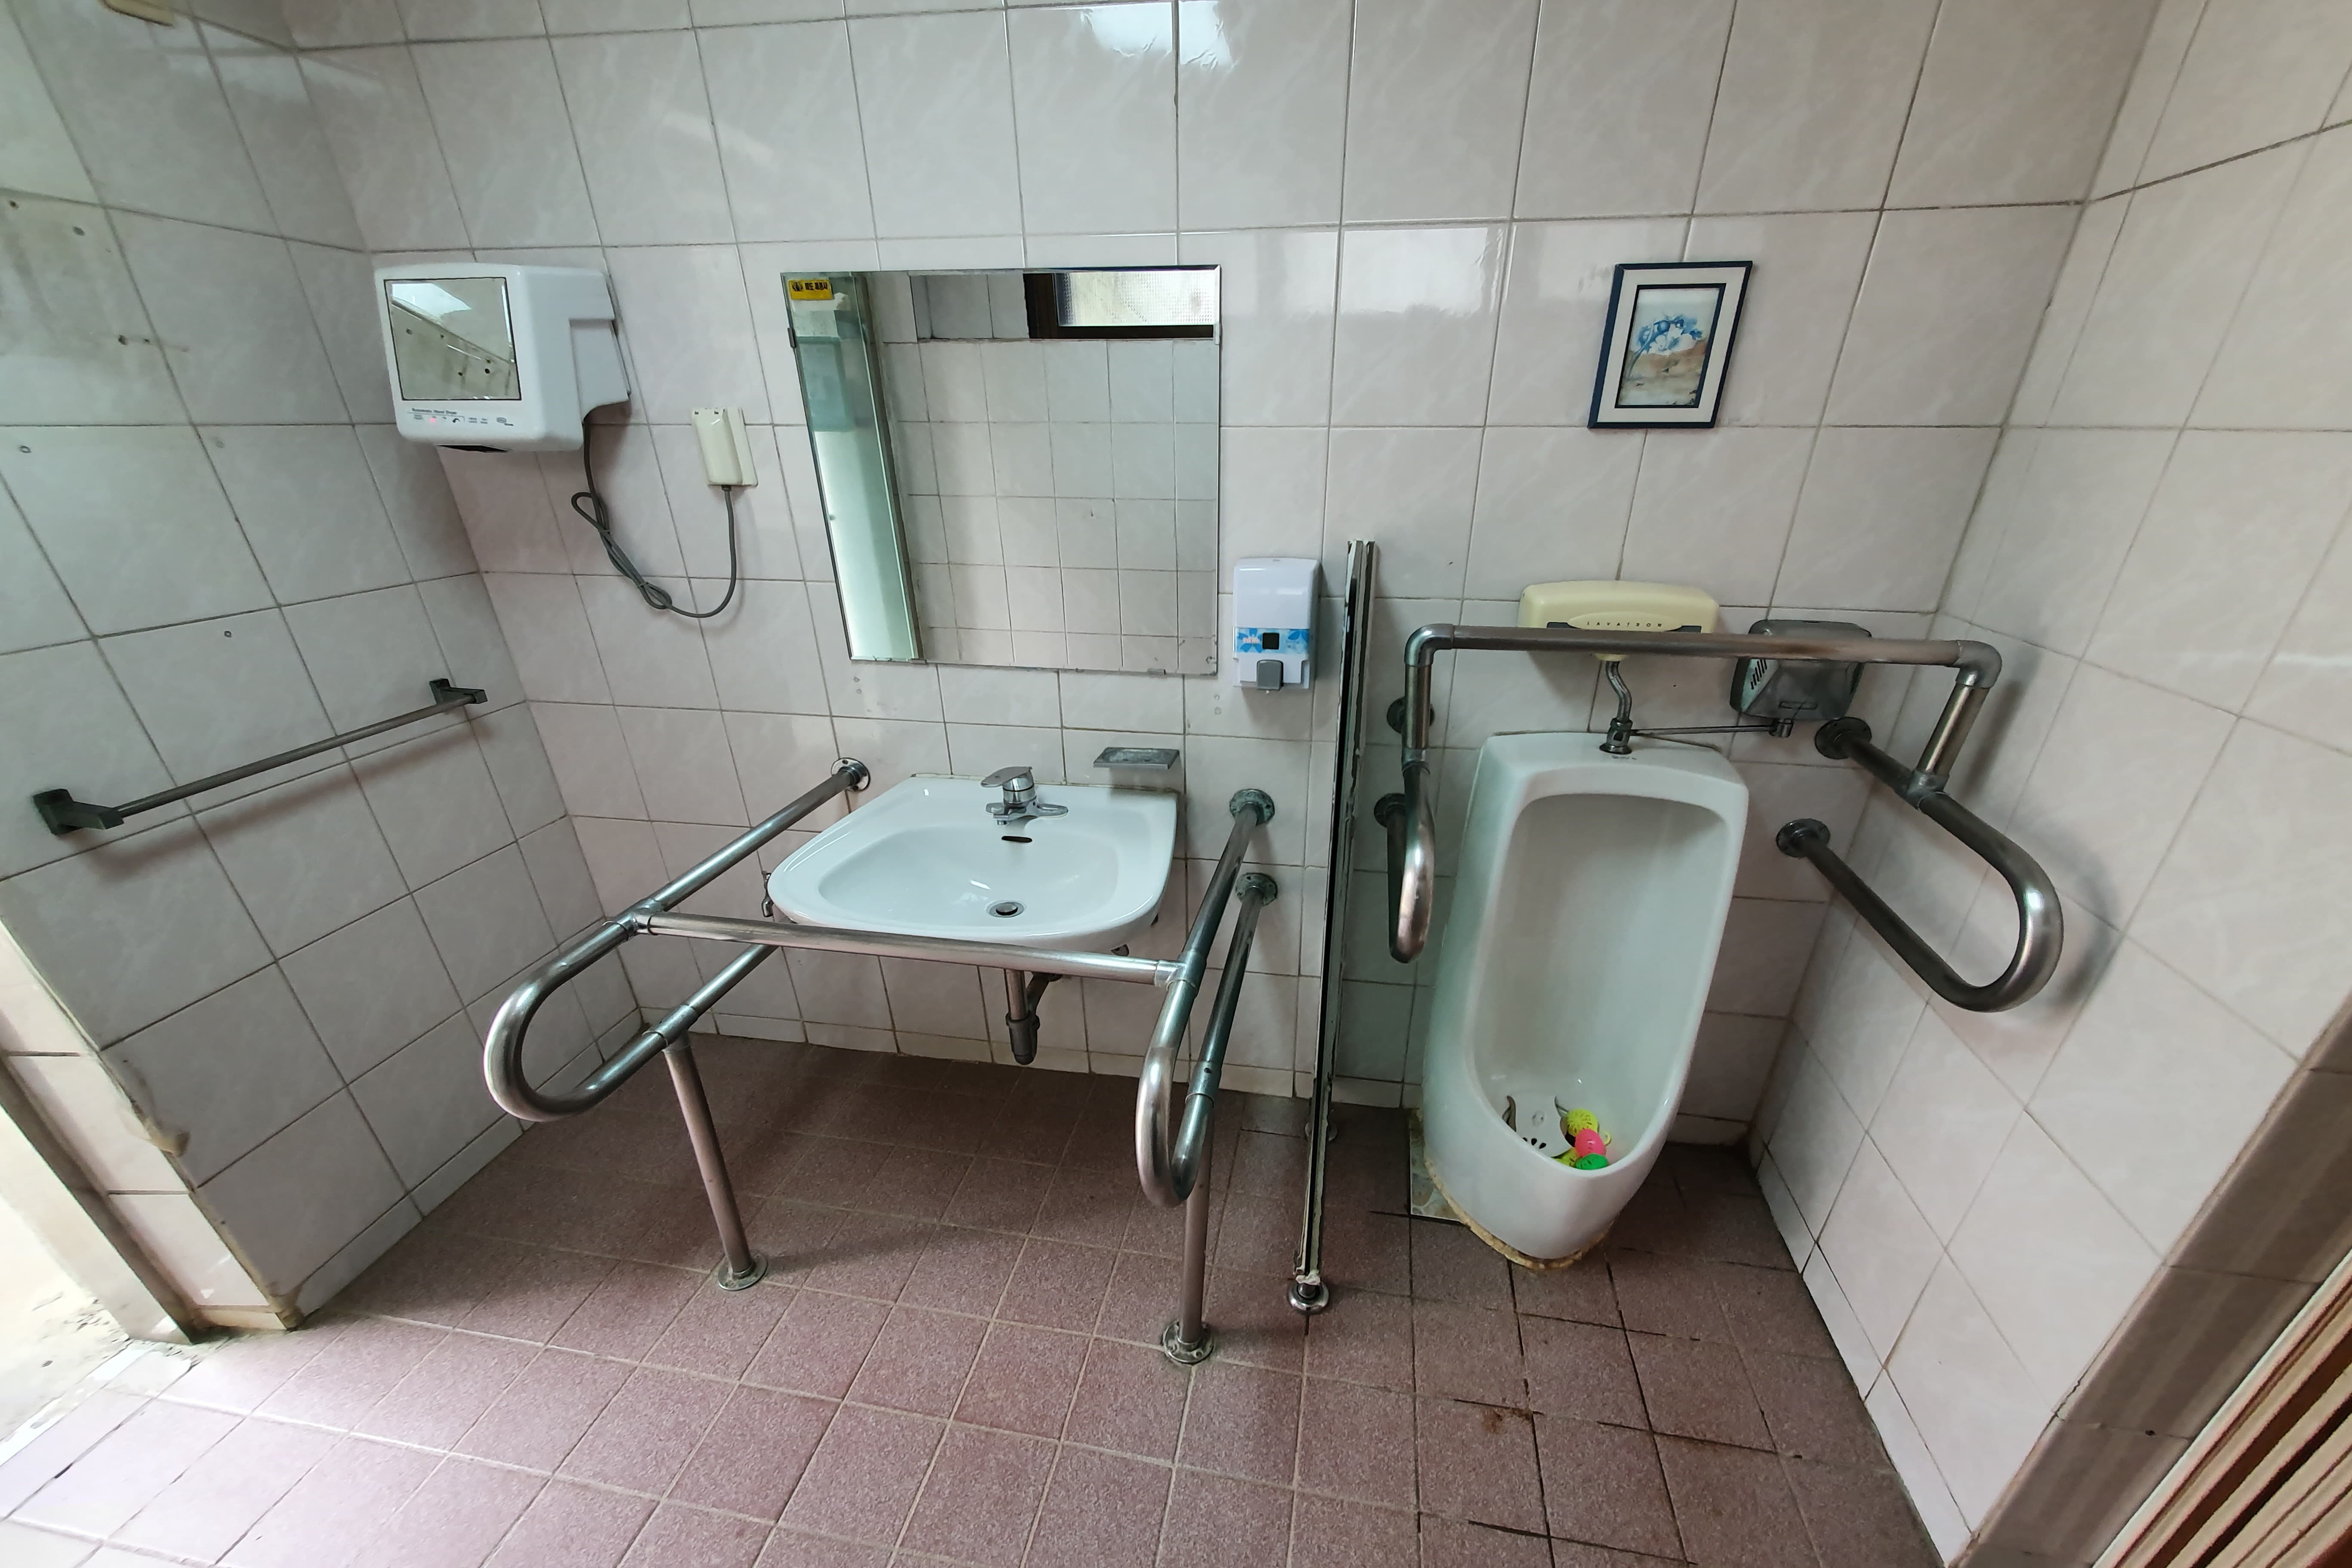 Accessible restroom for persons with disabilities 0 : Accessible toilet with a sink and a urinal side by side